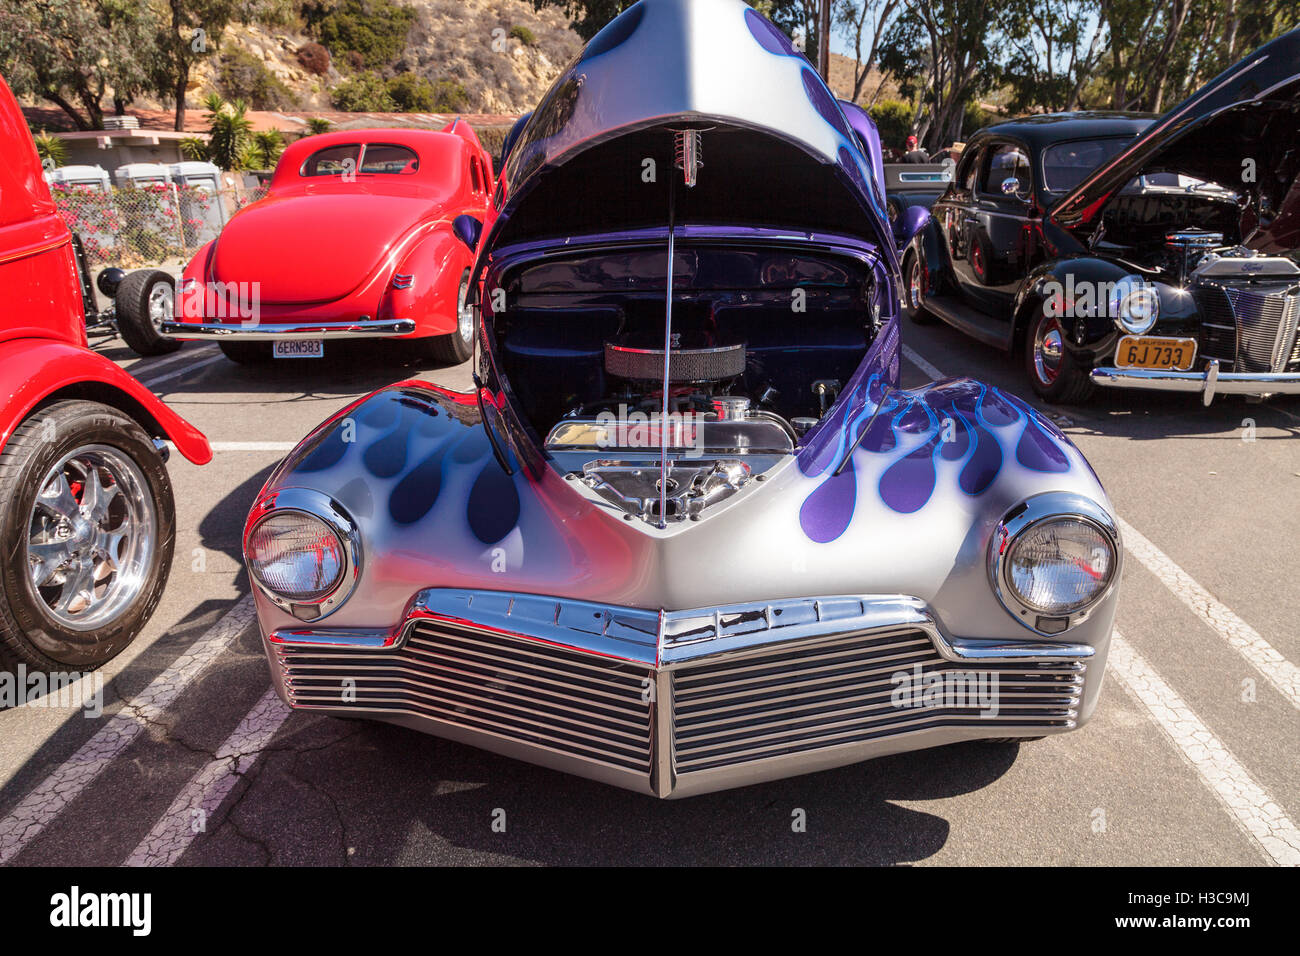 Laguna Beach, CA, USA - October 2, 2016: Blue with silver flames 1946 Studebaker Champion owned by Jim Magill and displayed at t Stock Photo